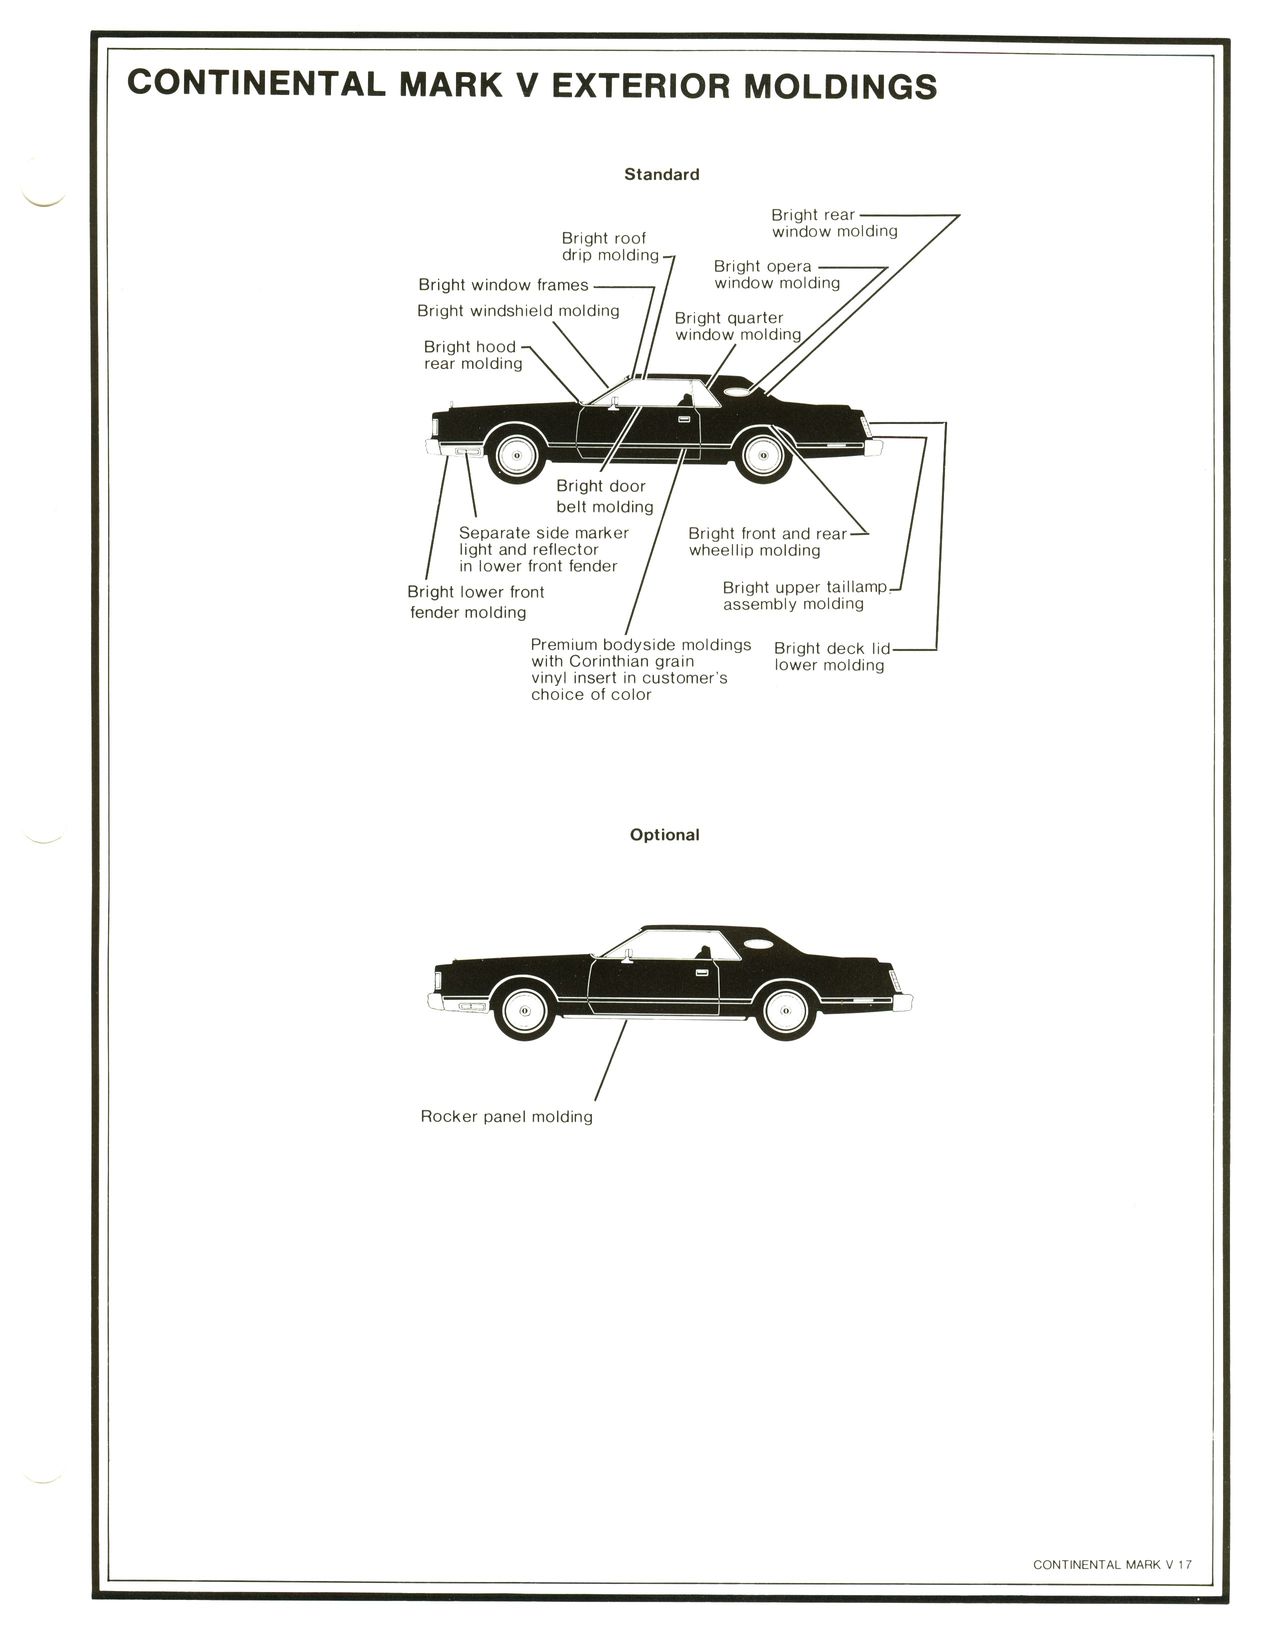 1977_Continental_Product_Facts_Book-1-17